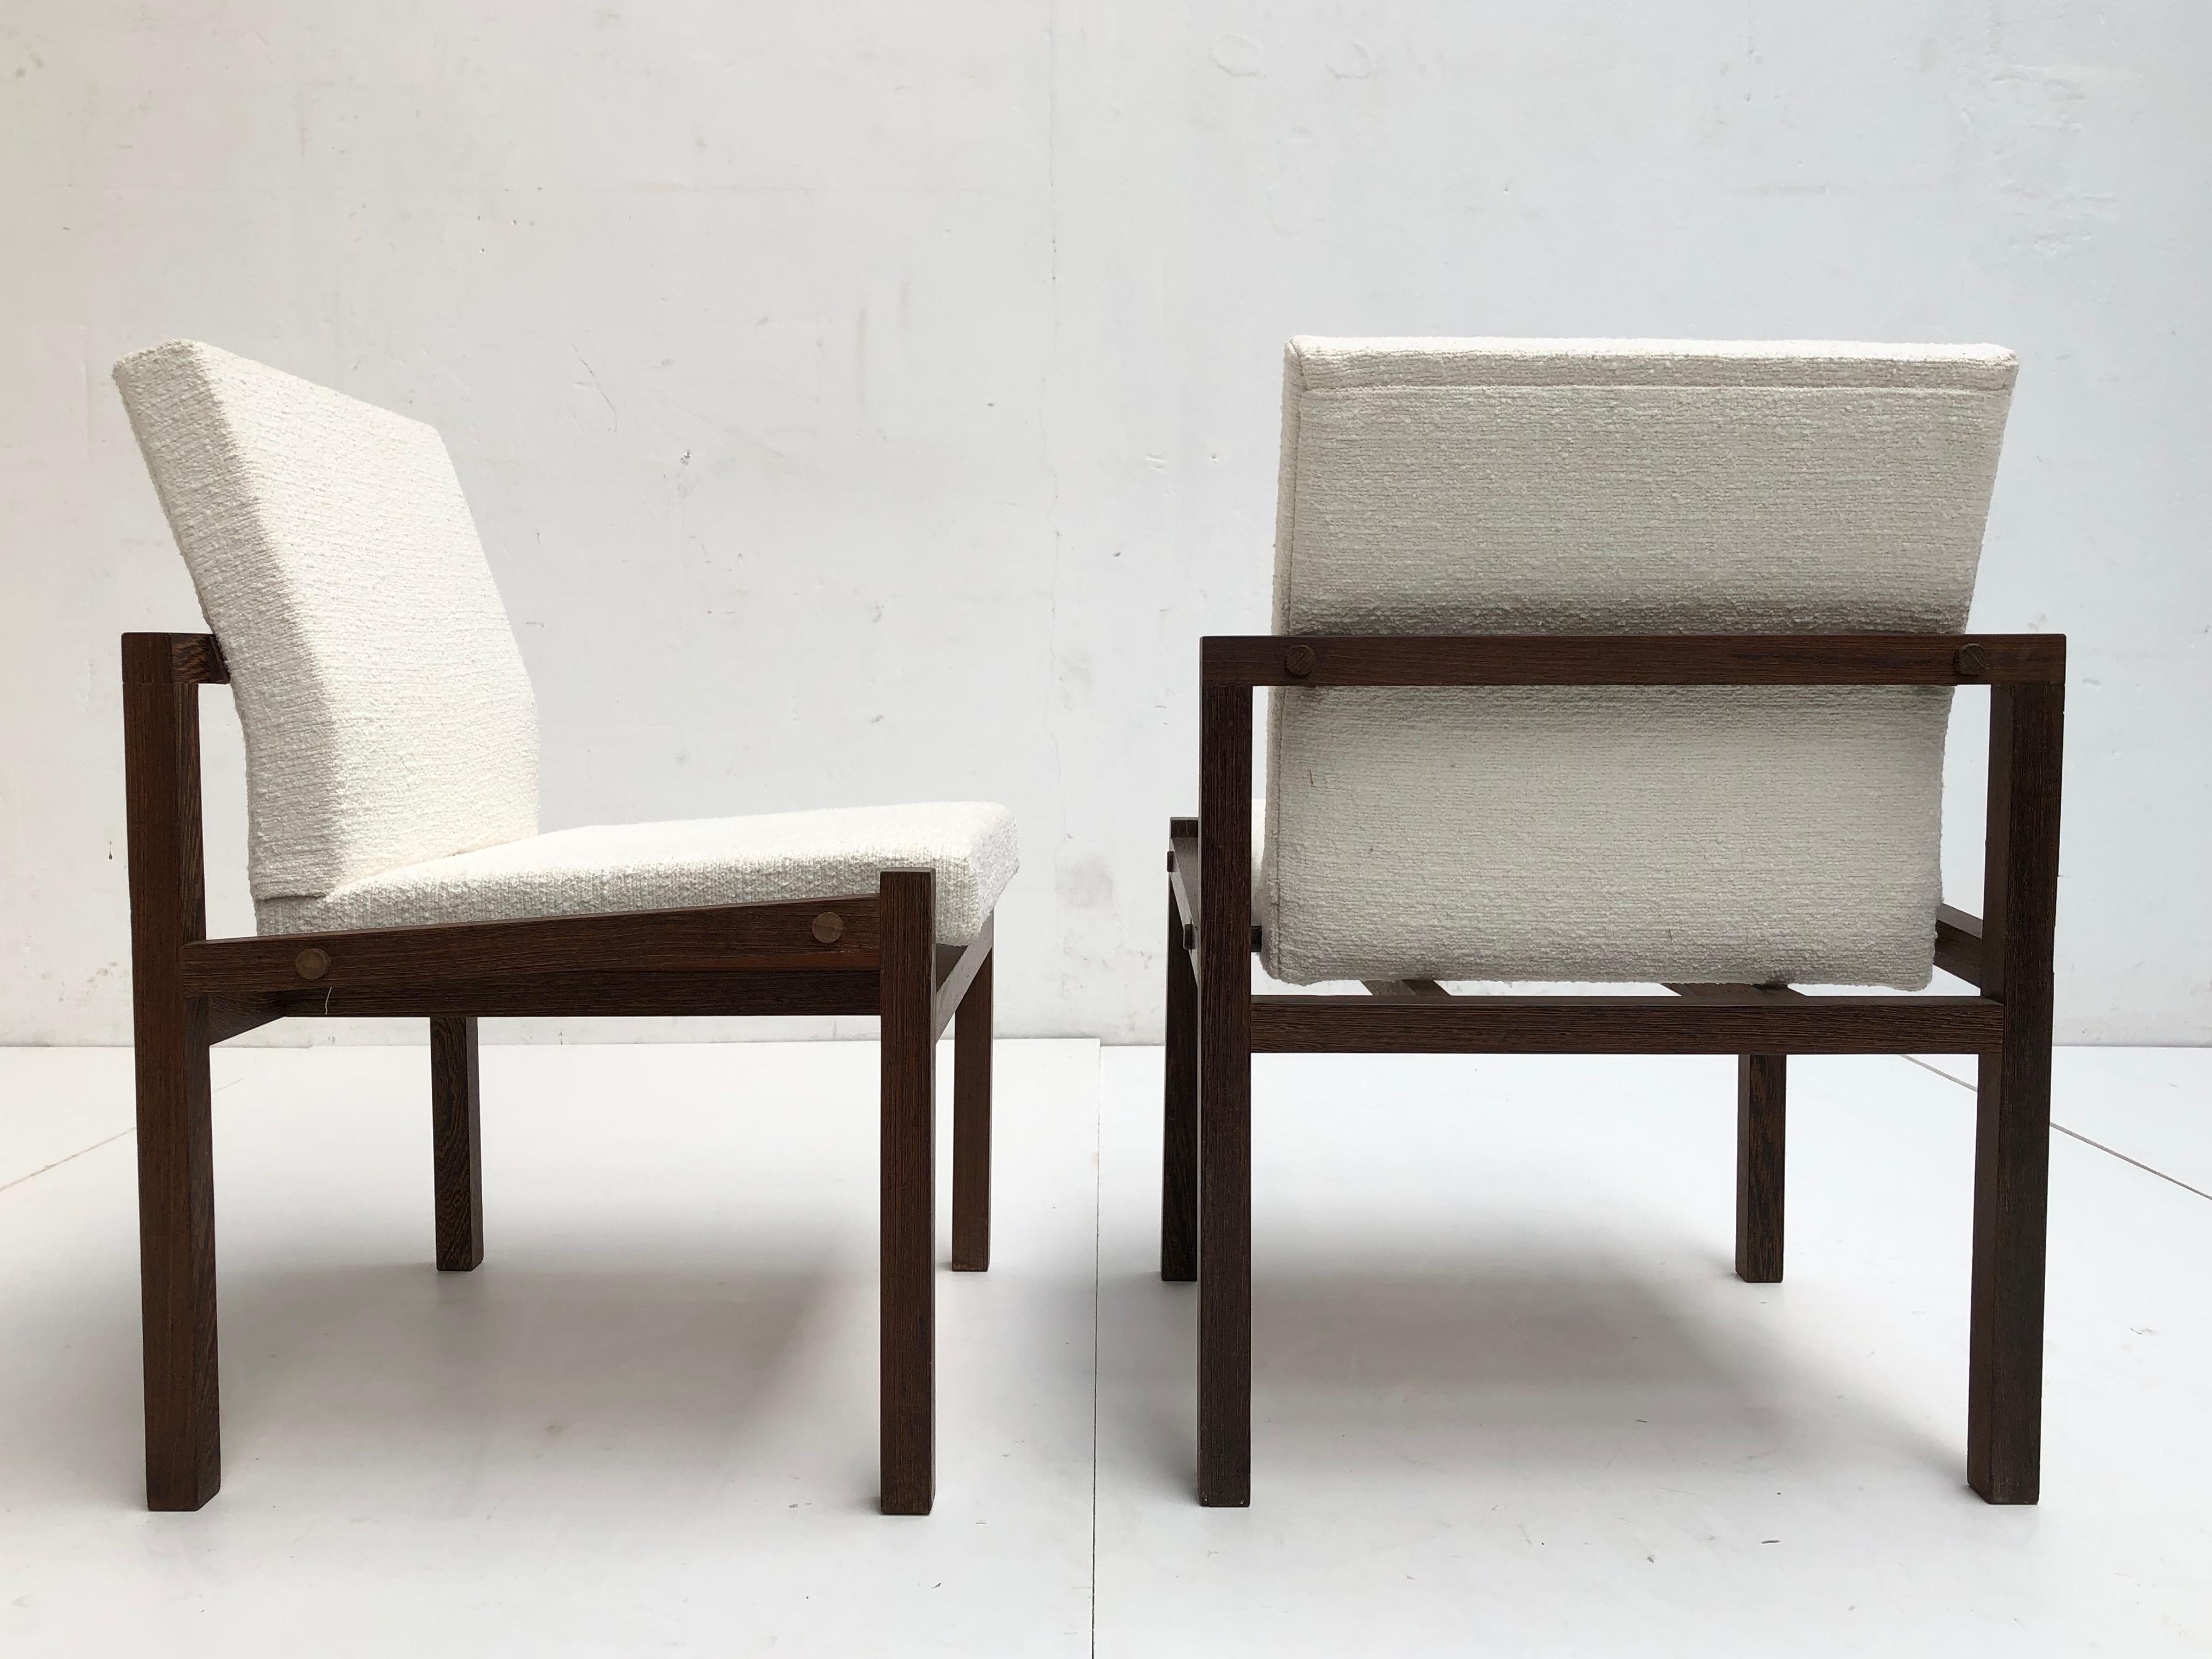 Minimalist Dutch 1960s Lounge Chairs in Solid Wenge Wood and New Pure Wool Upholstery For Sale